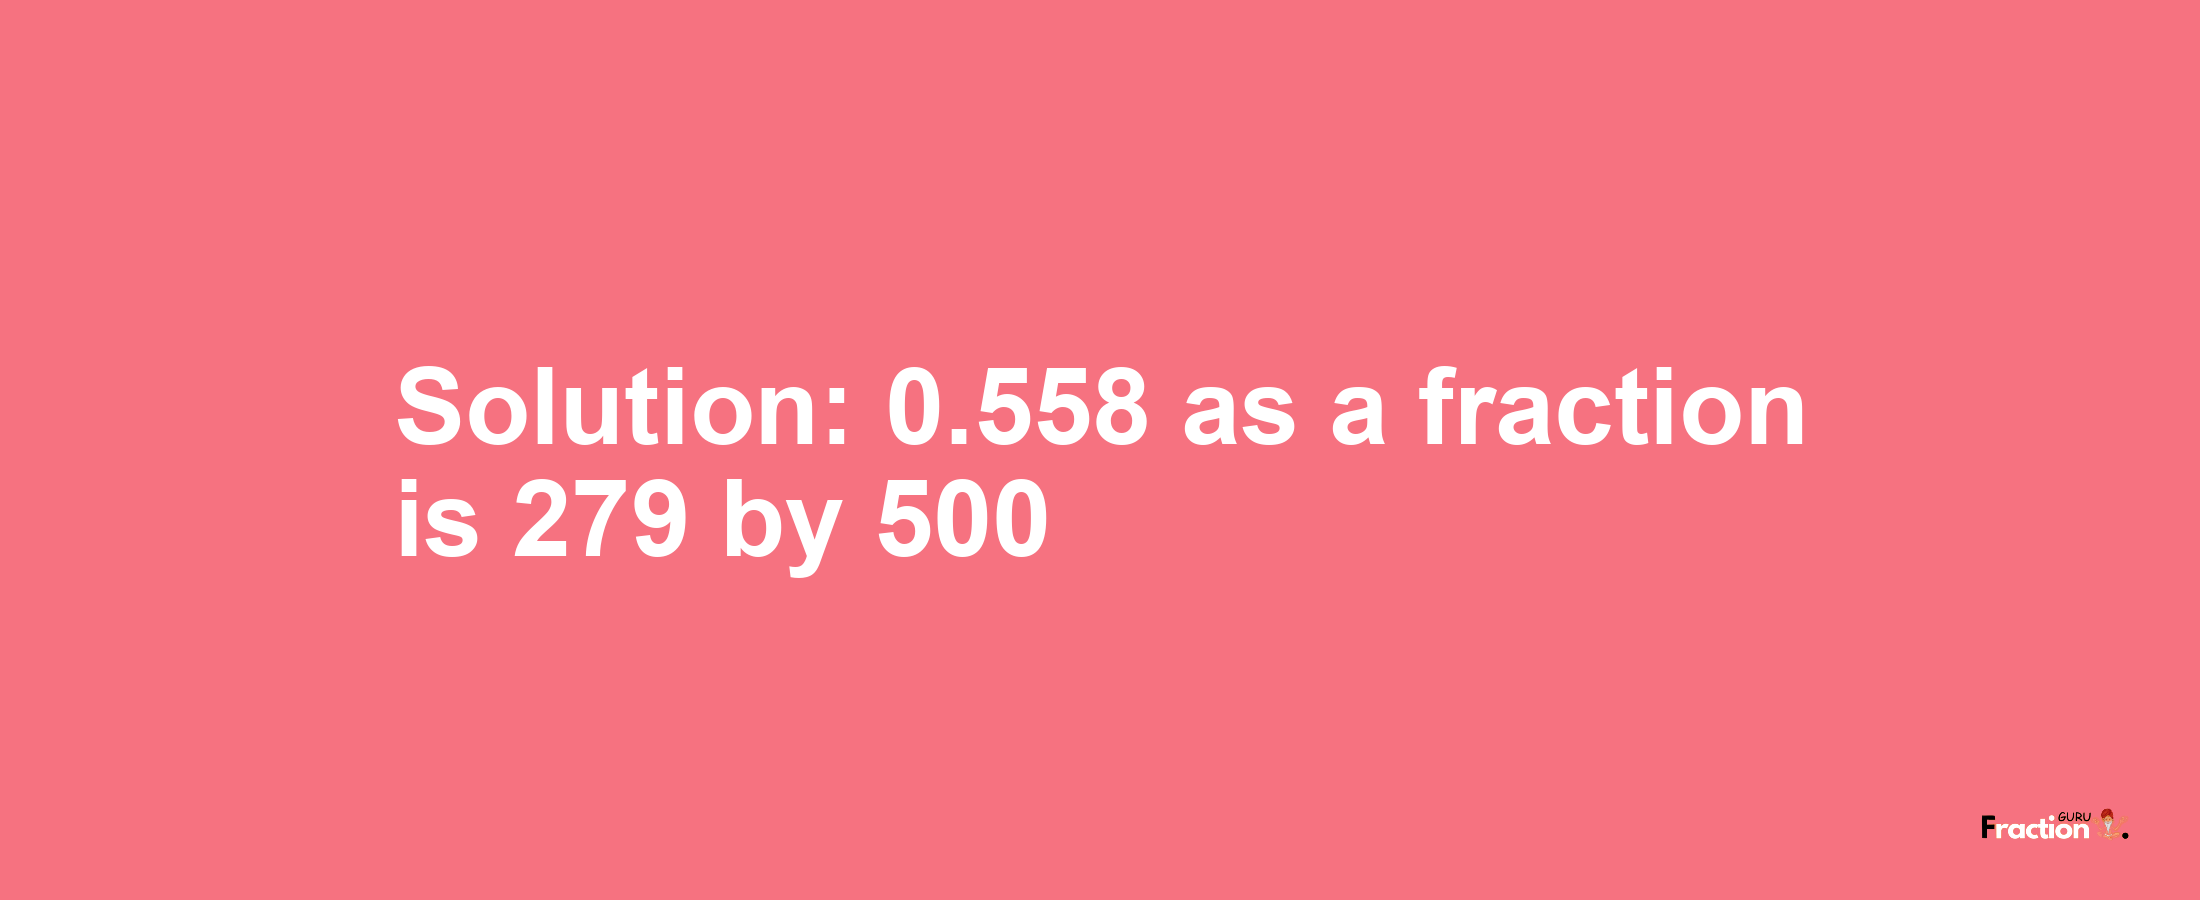 Solution:0.558 as a fraction is 279/500